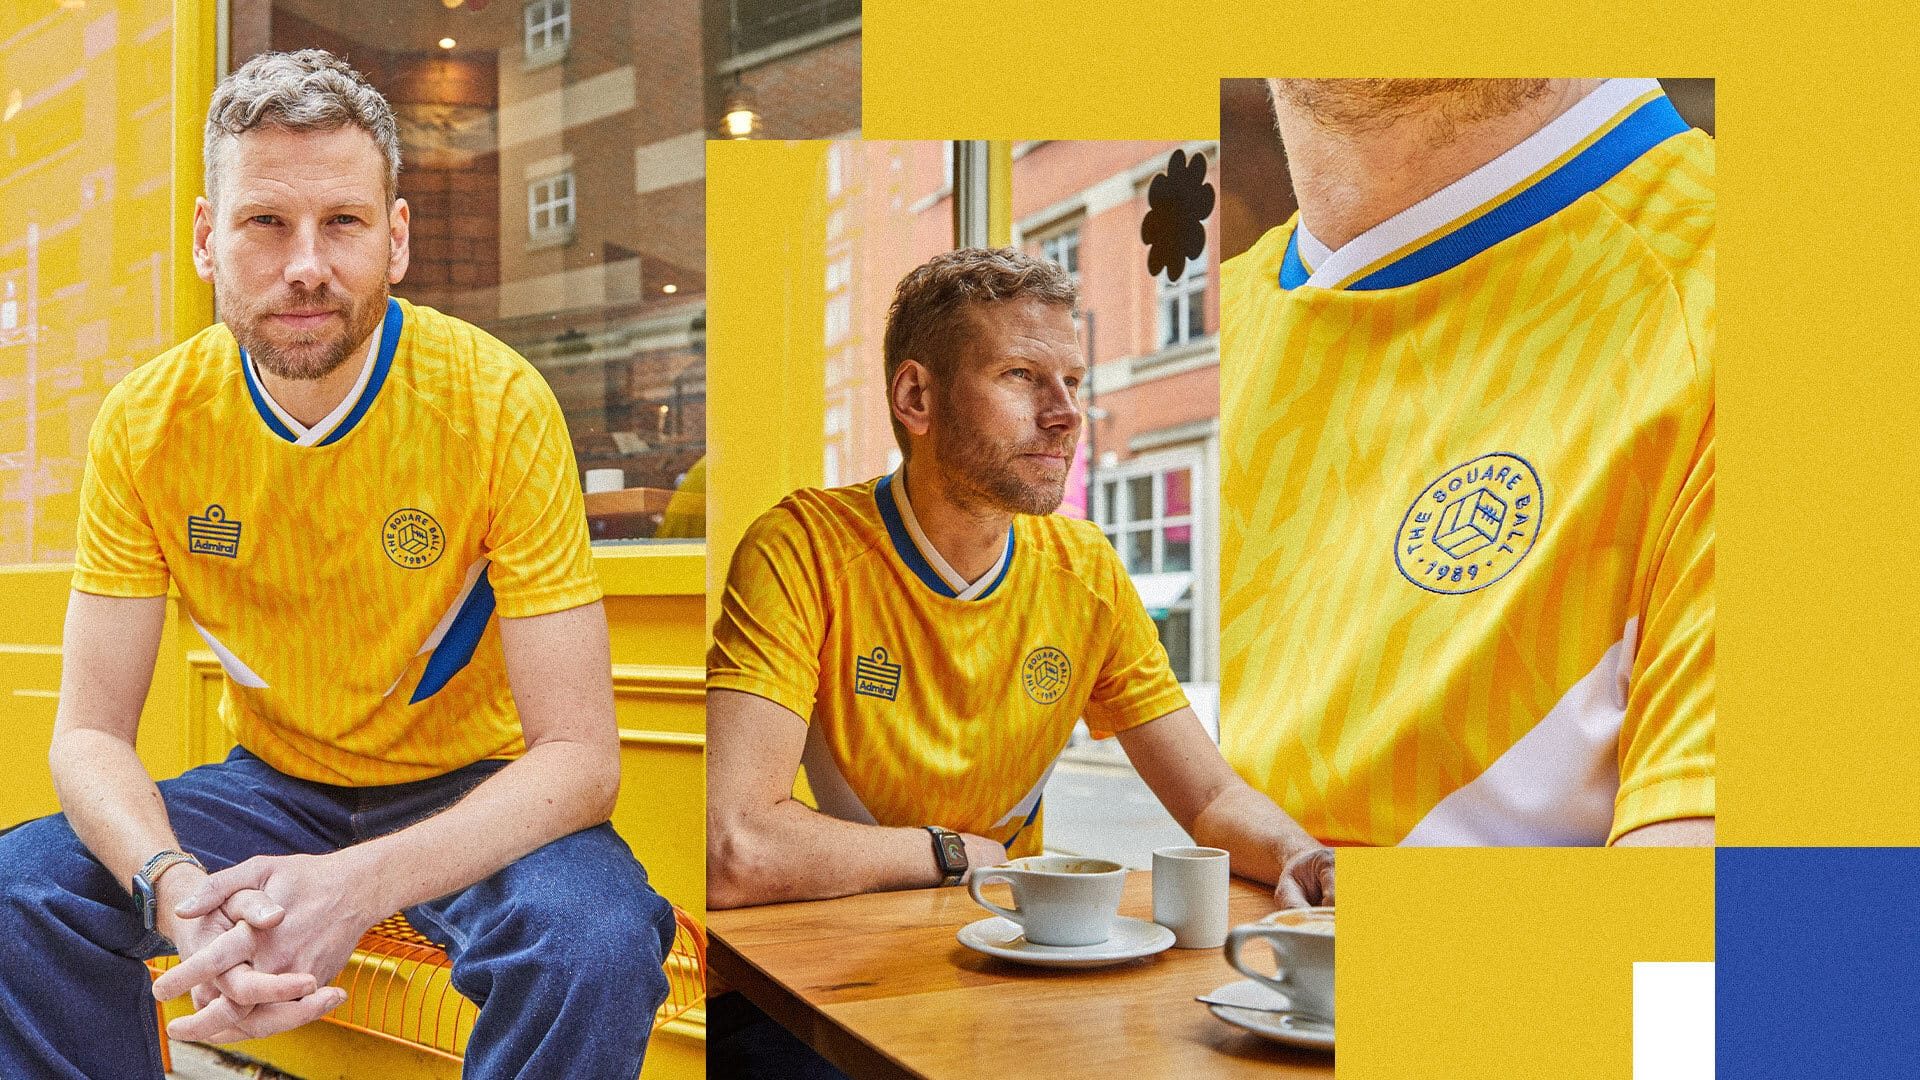 A collage of photos of Simon Rix from Kaiser Chiefs at Laynes Espresso in Leeds wearing our TSB x Admiral collab football shirt, which is yellow with a blue and white v-neck collar, white and blue chest flashes, and has the TSB and Admiral logos on the chest